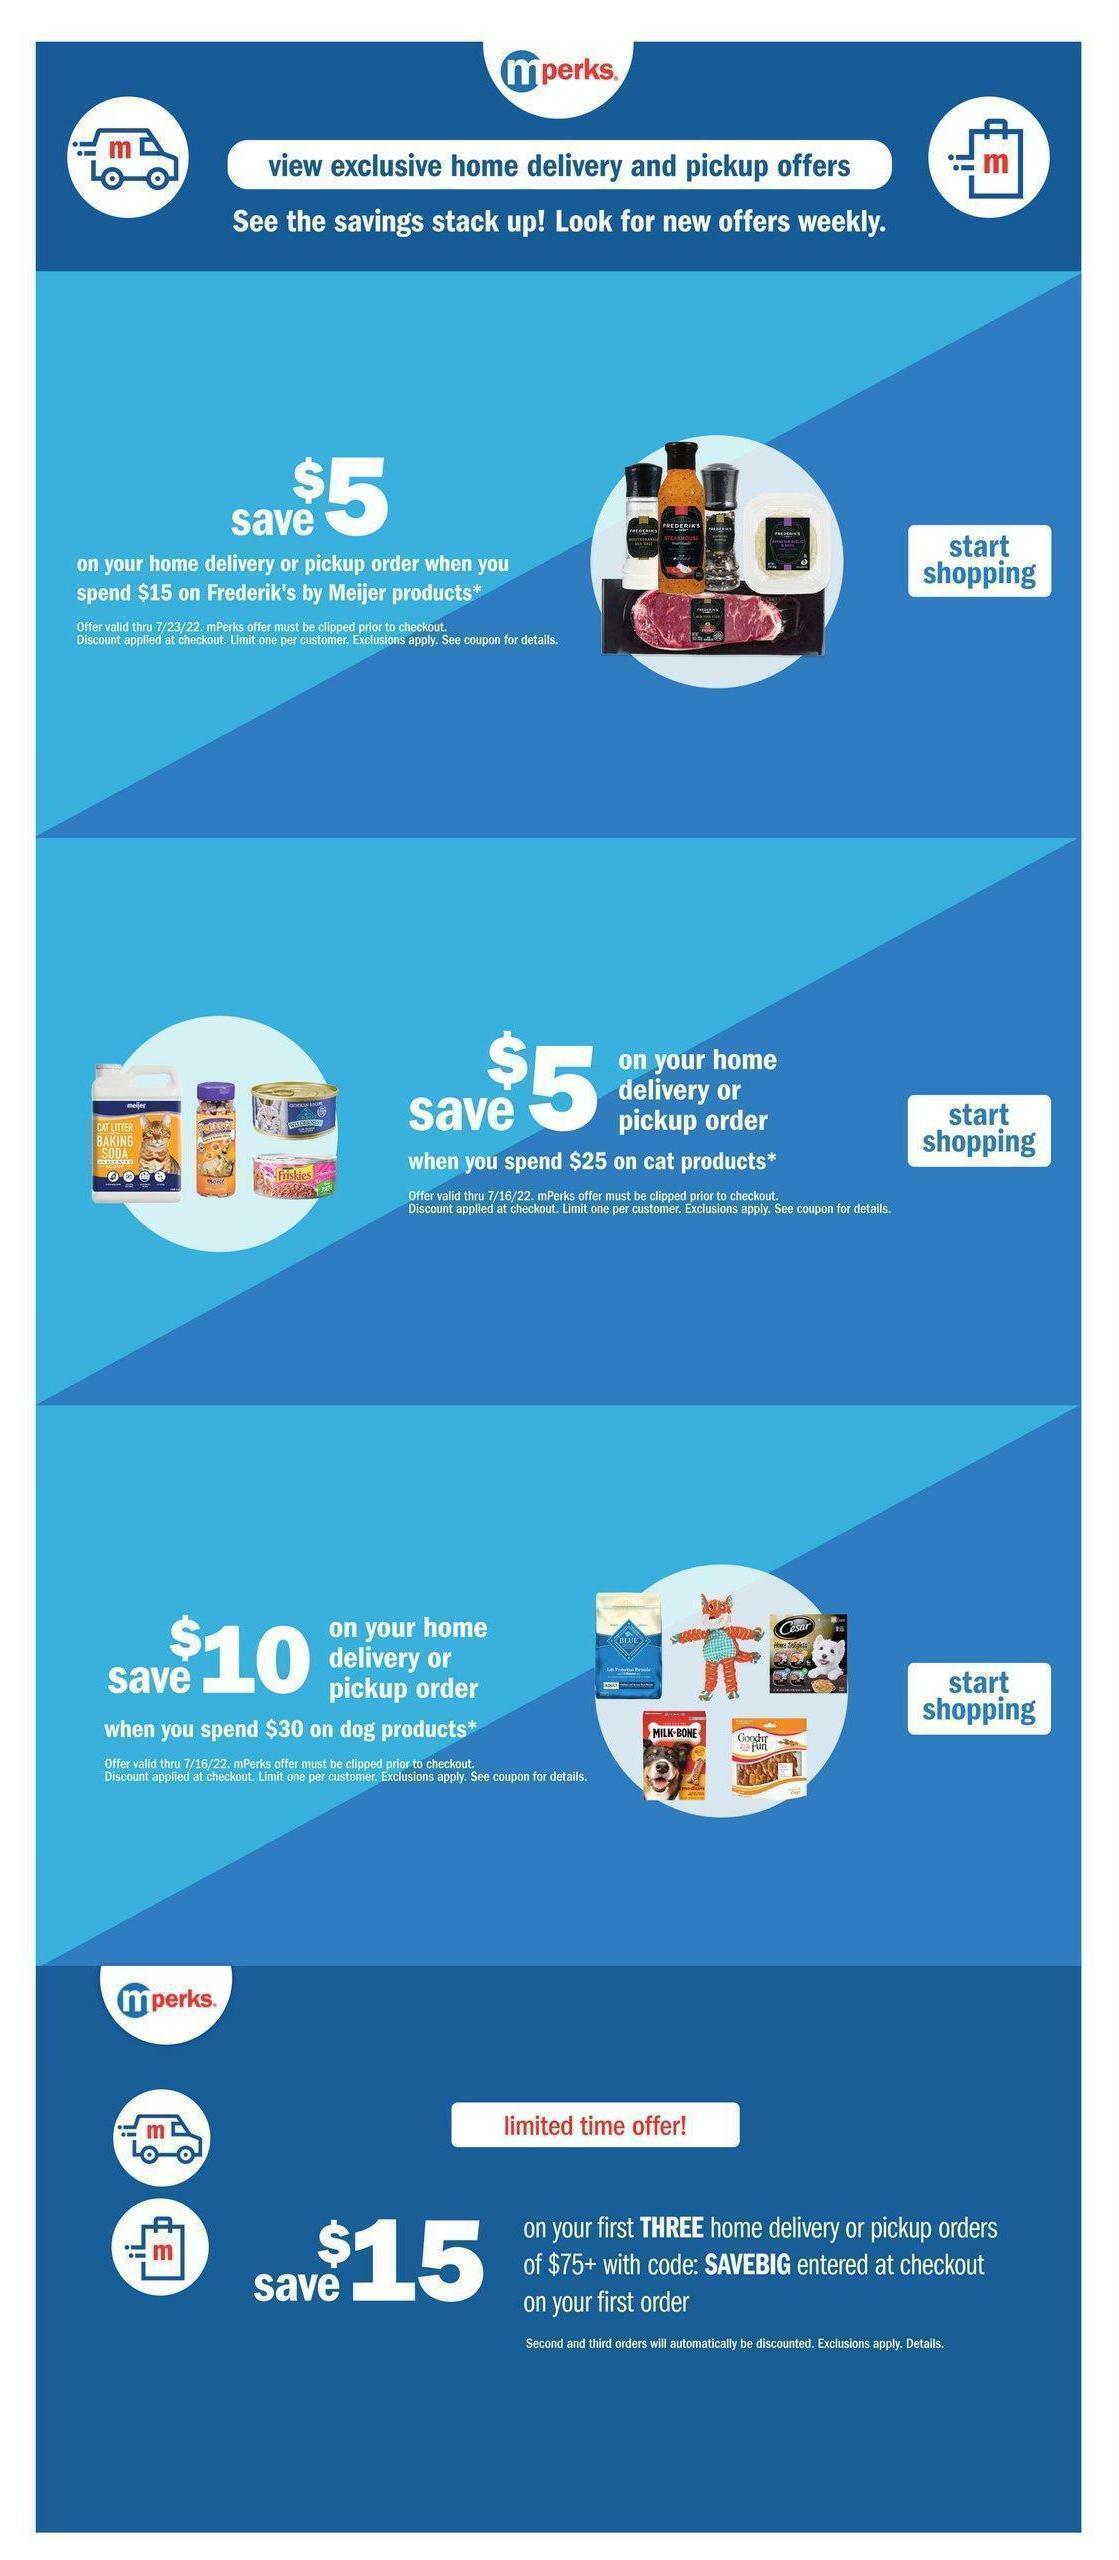 Meijer Weekly Ad from July 10